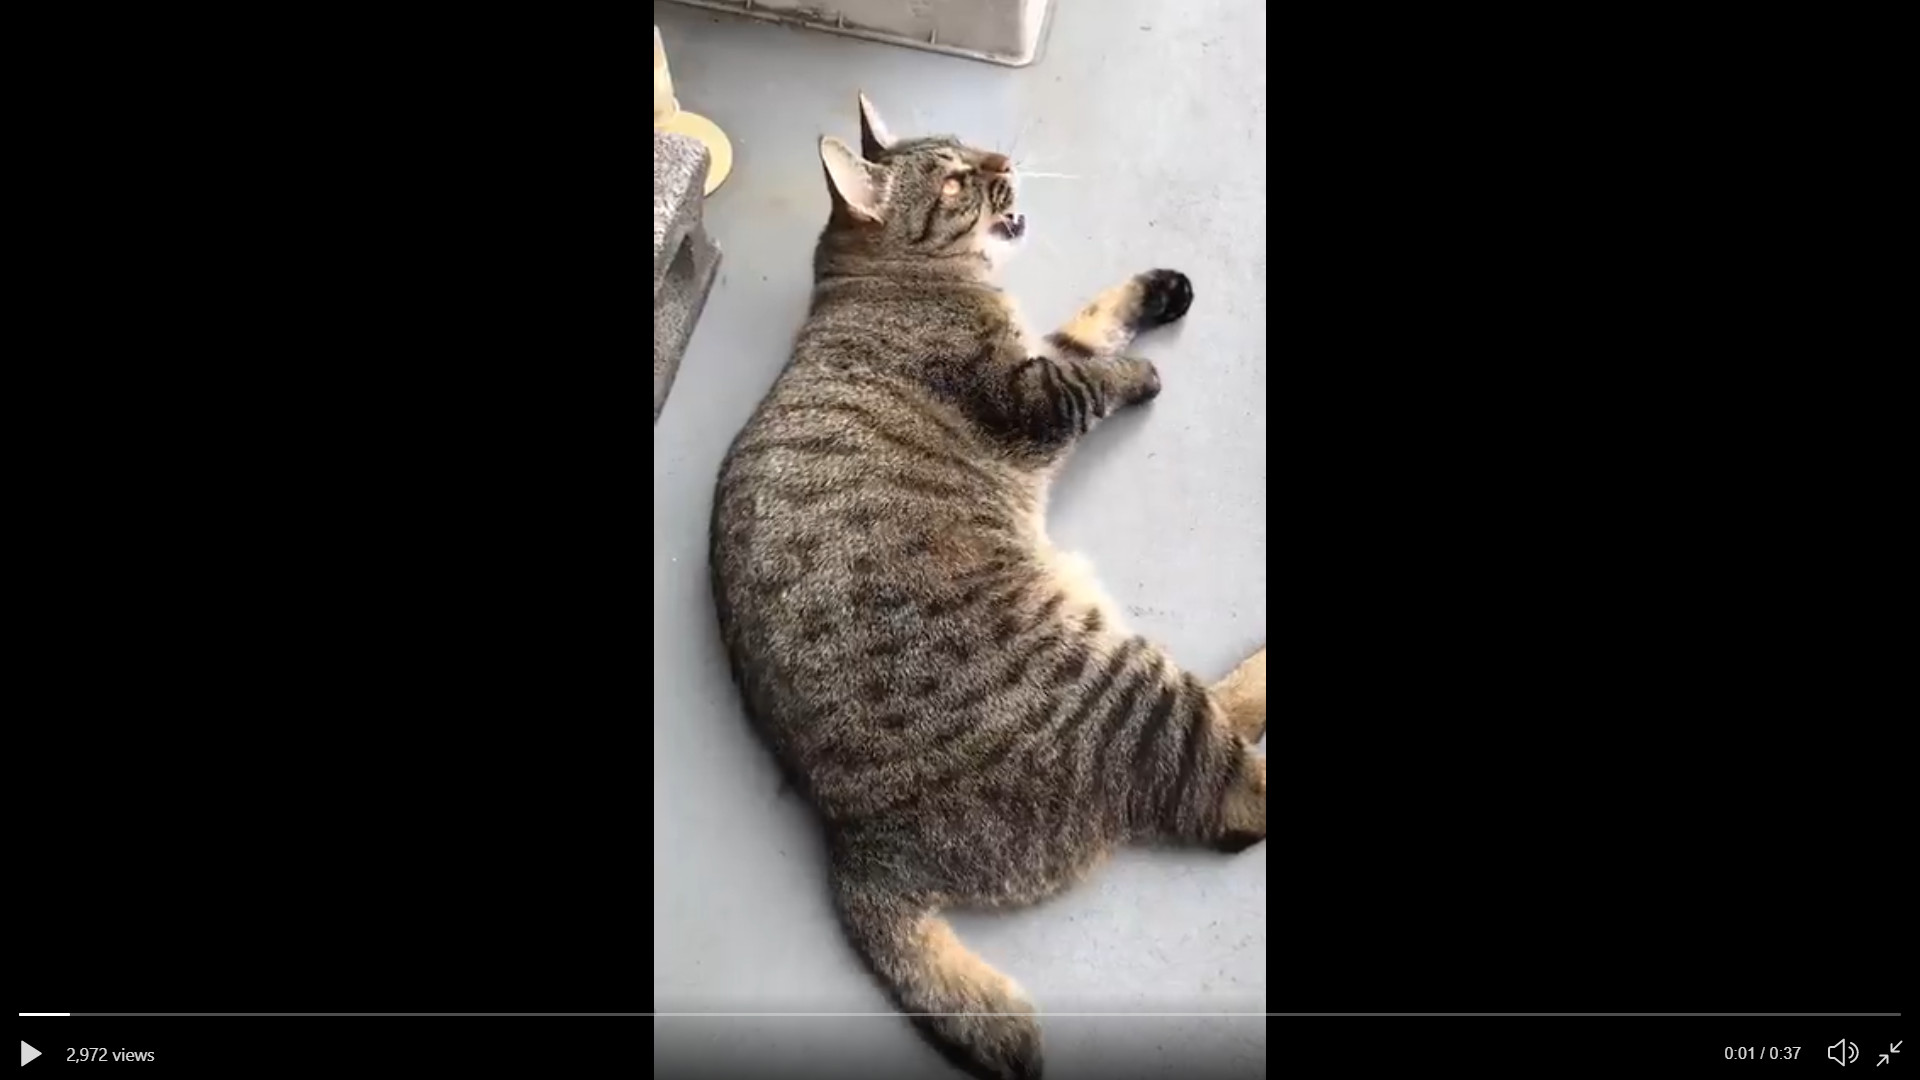 Adorable videos of cats chirping at birds wins the for us